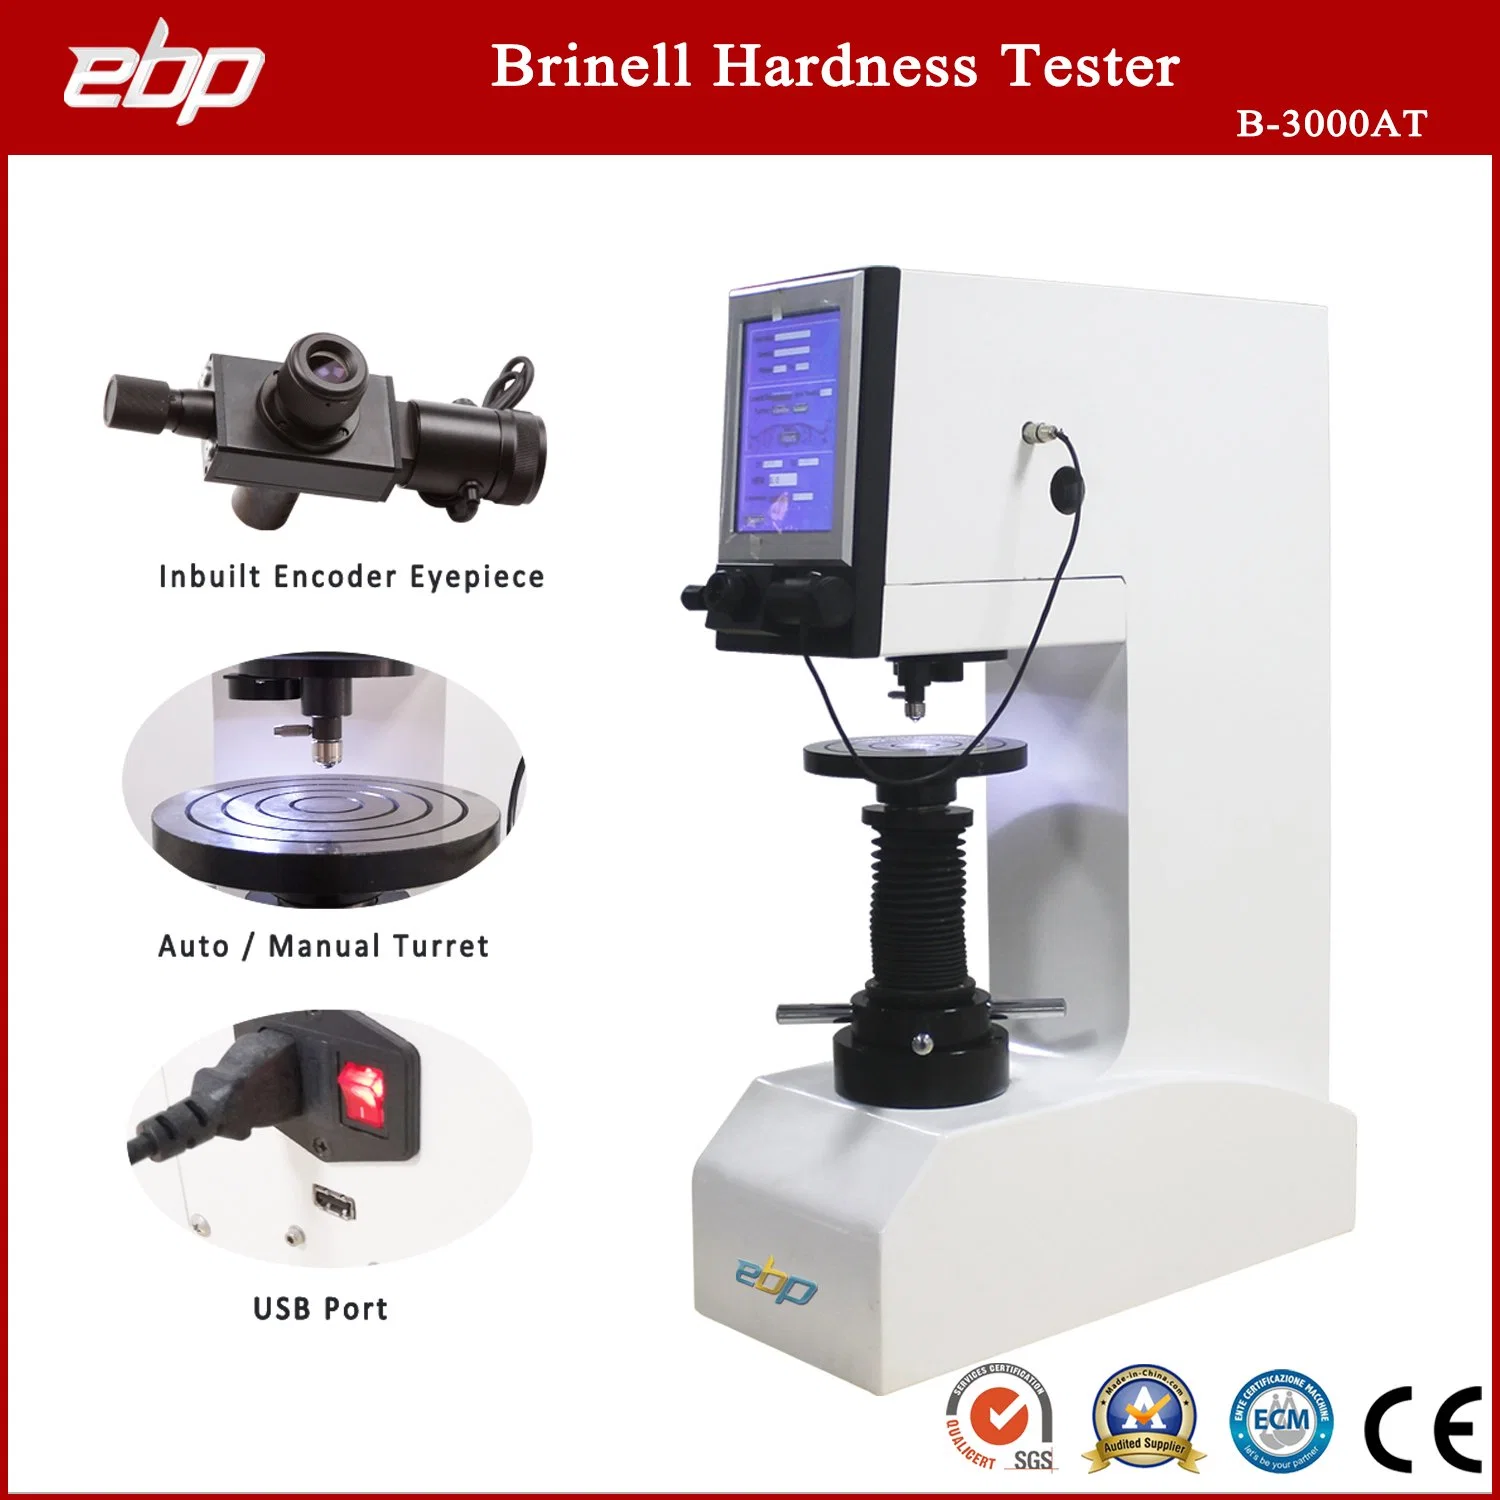 Automatic Digital Brinell Hardness Tester for Metal Hardness Testing